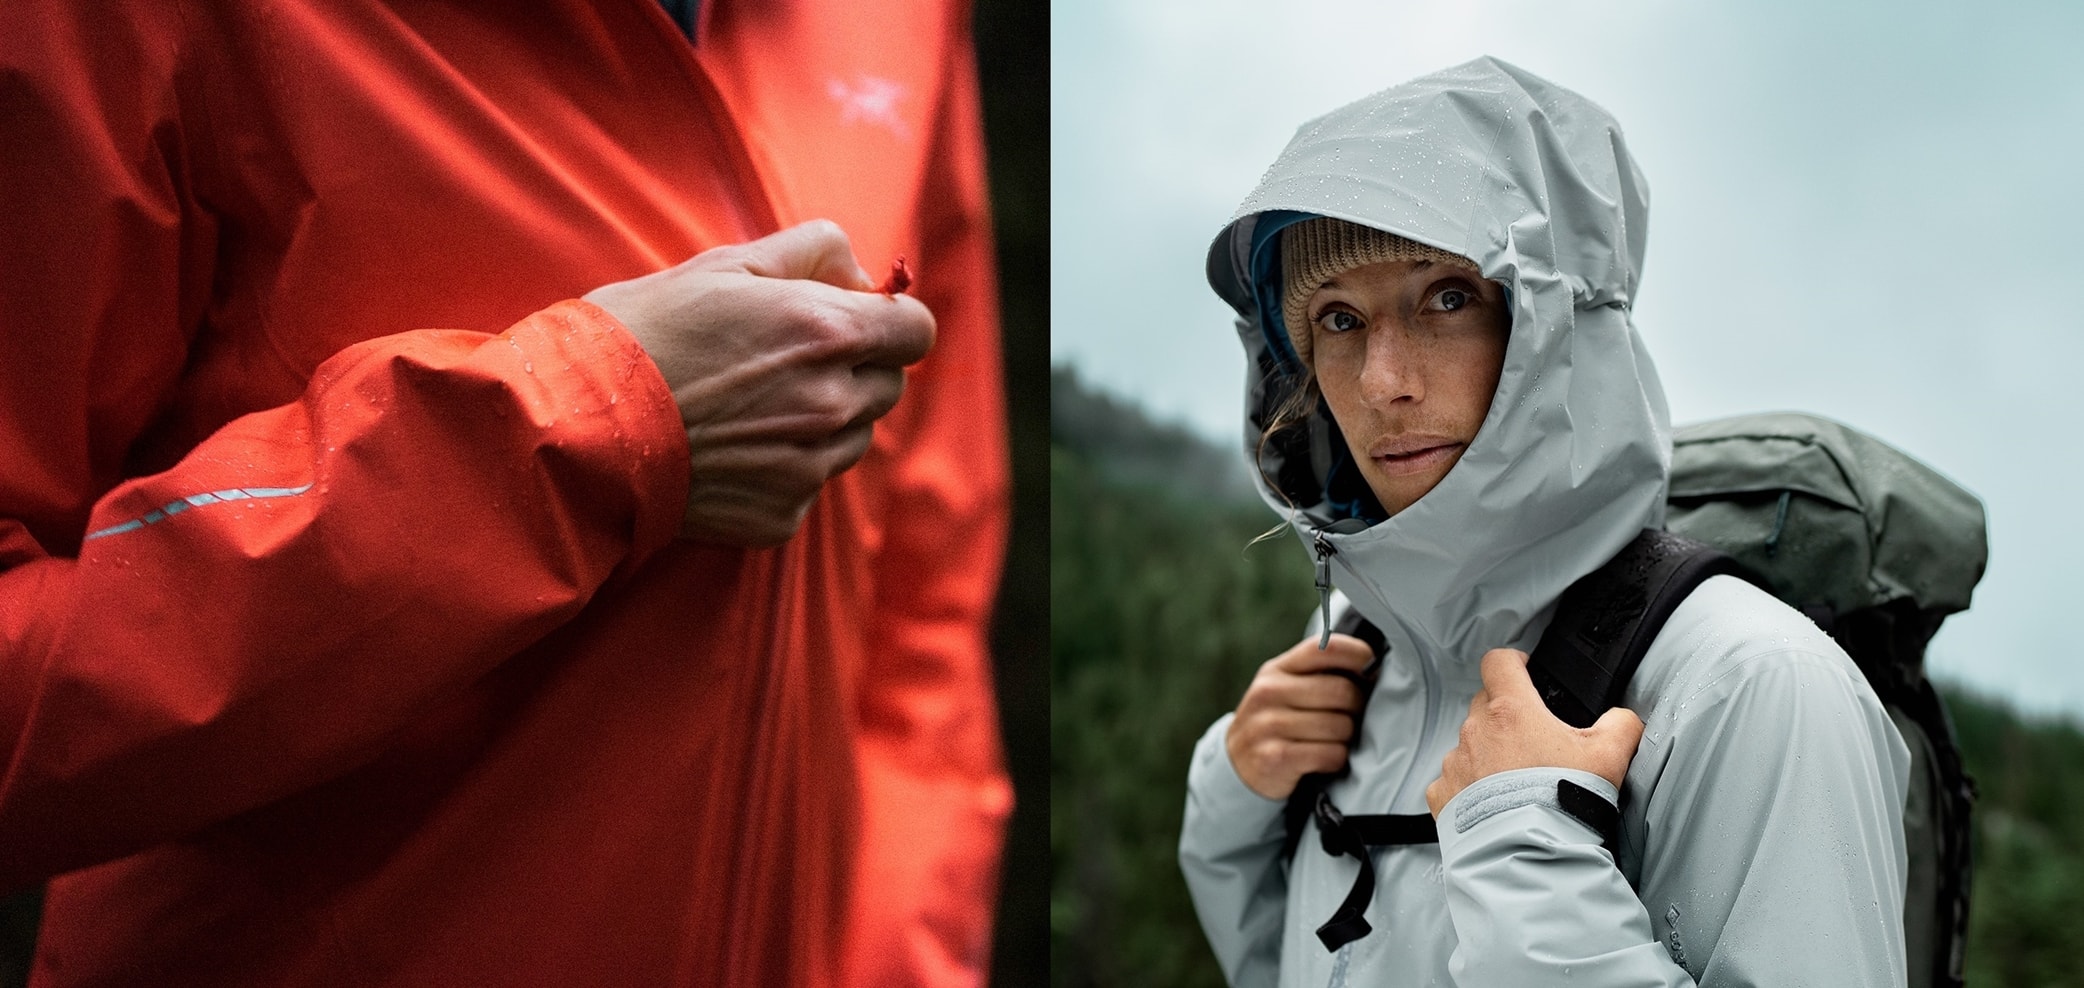 Arc'teryx's waterproof rain jackets will help you stay dry and comfortable